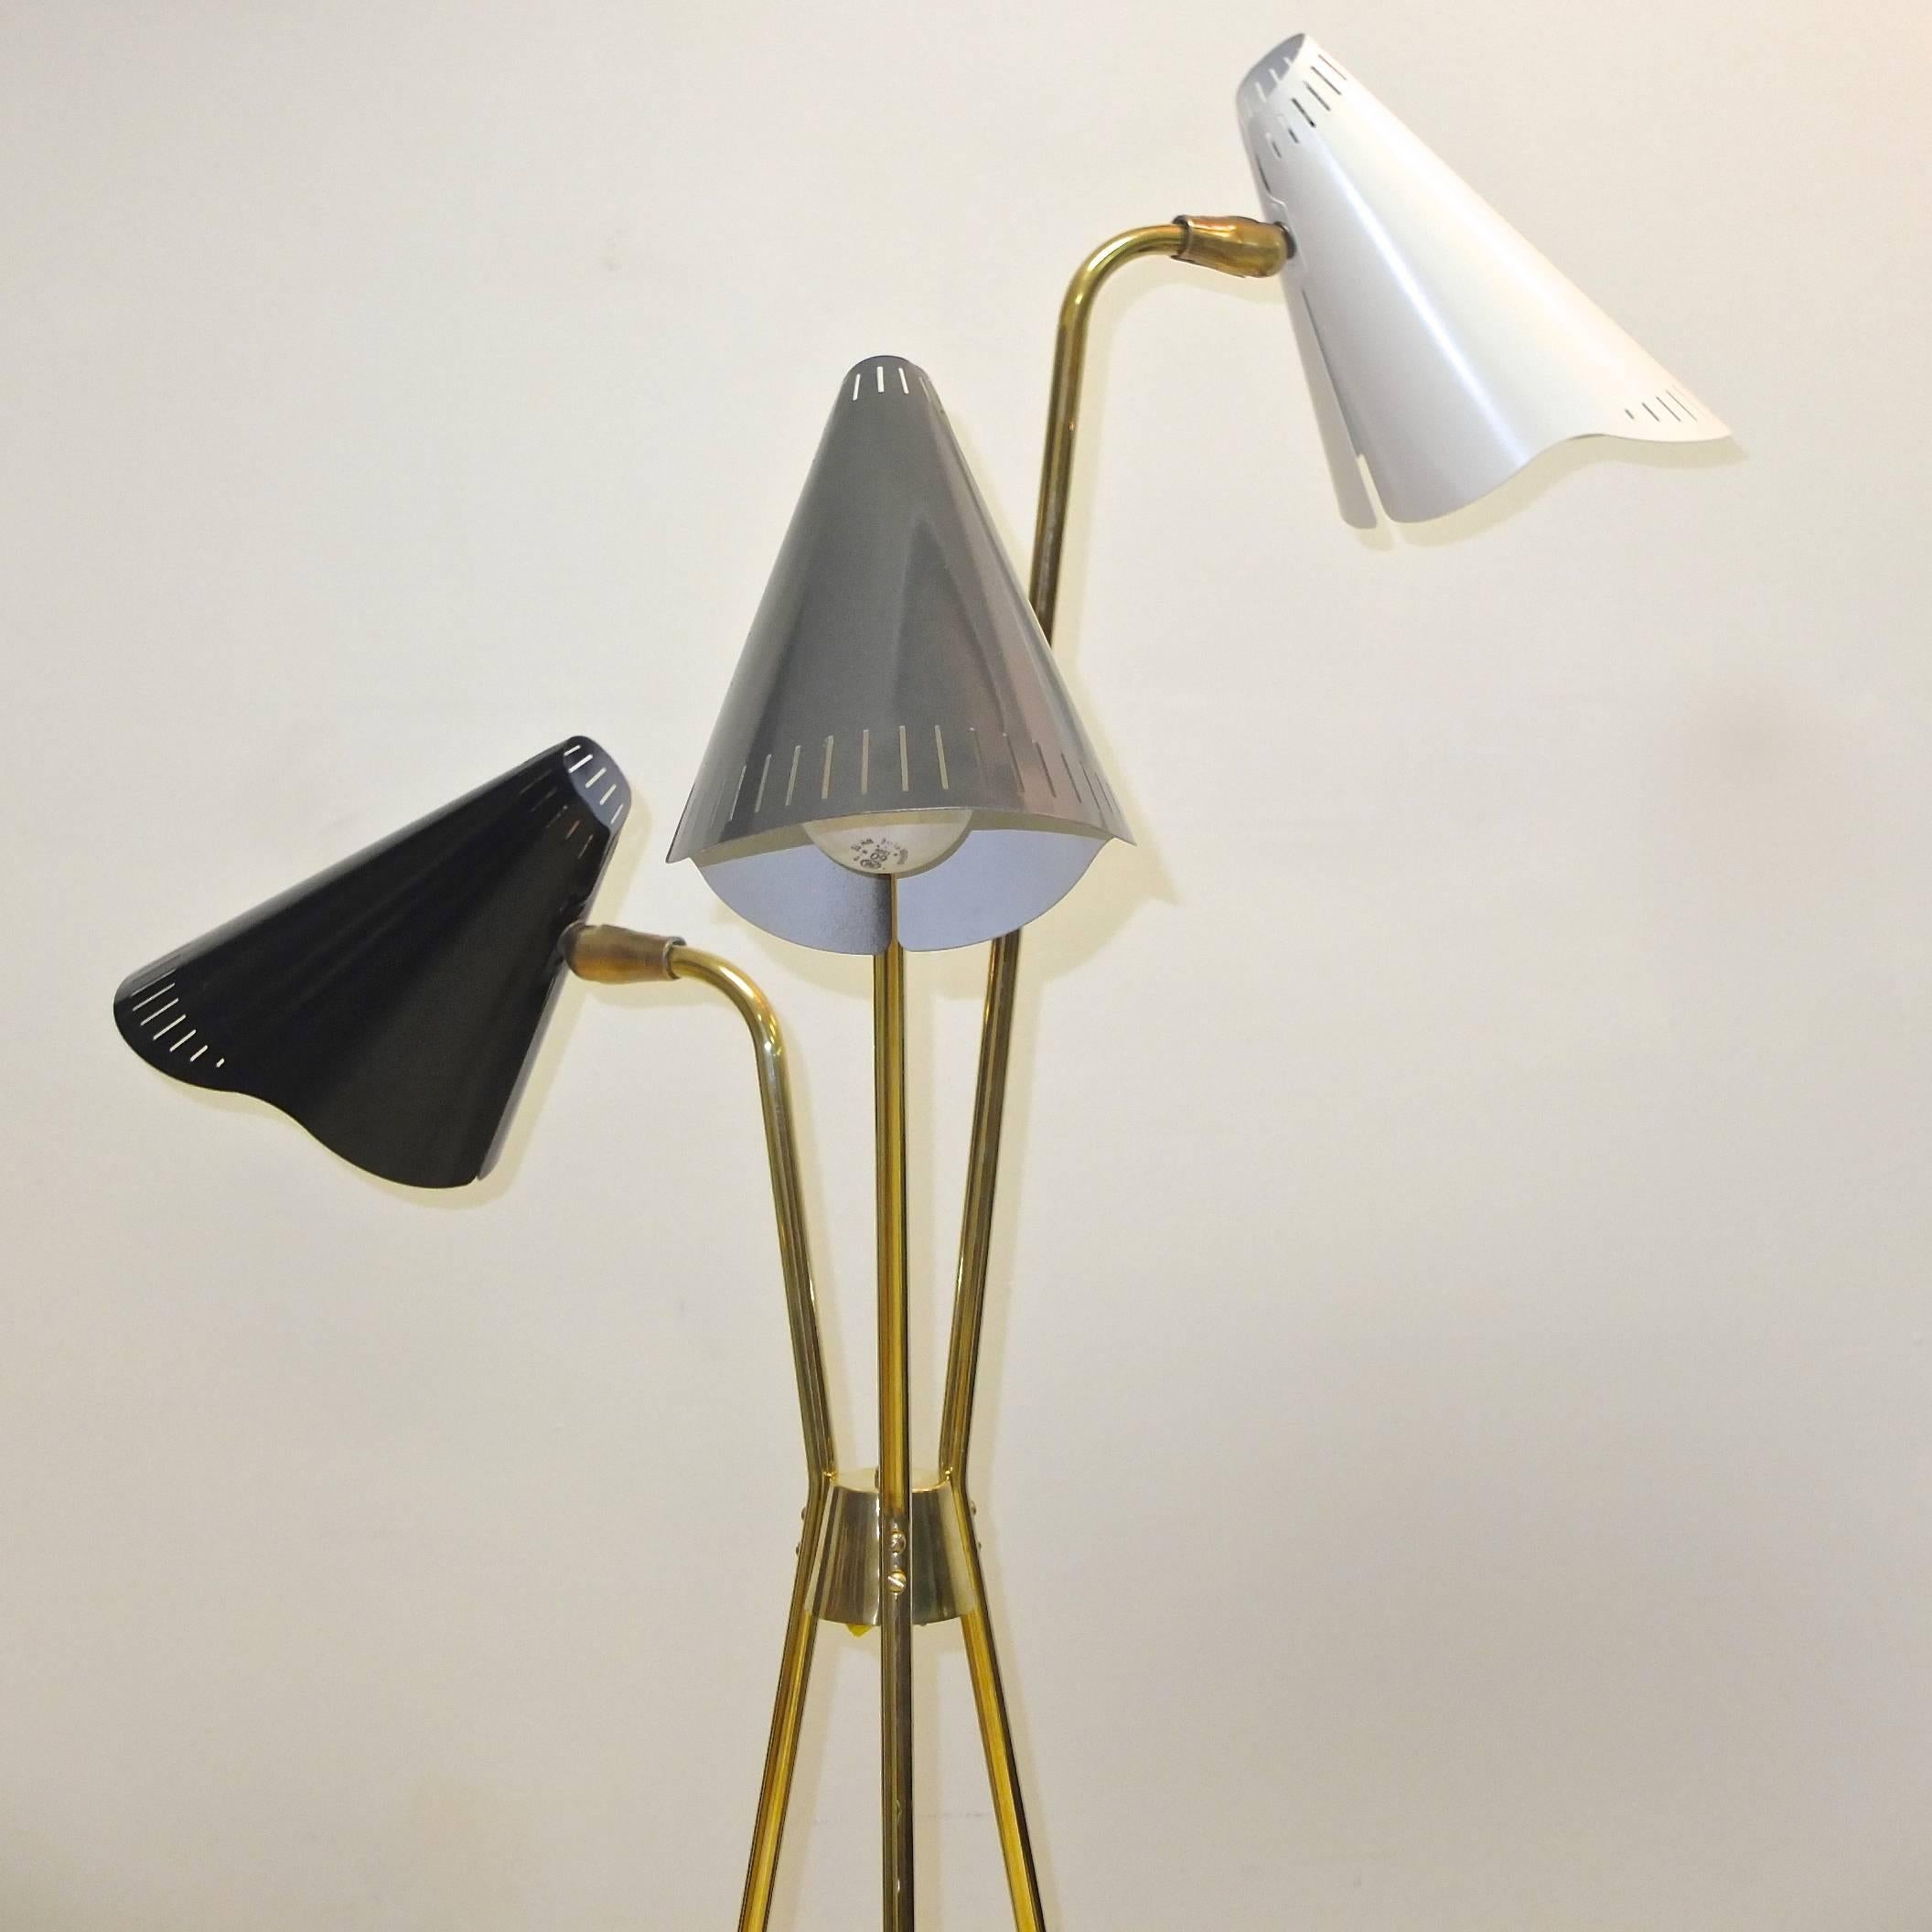 Very scarce brass tripod floor lamp with three colored cone lights designed by Gerald Thurston for Lightolier, circa 1953.

Brass switch os on the tapered brass hub where the three brass legs are secured. Switch operates one, two or all three